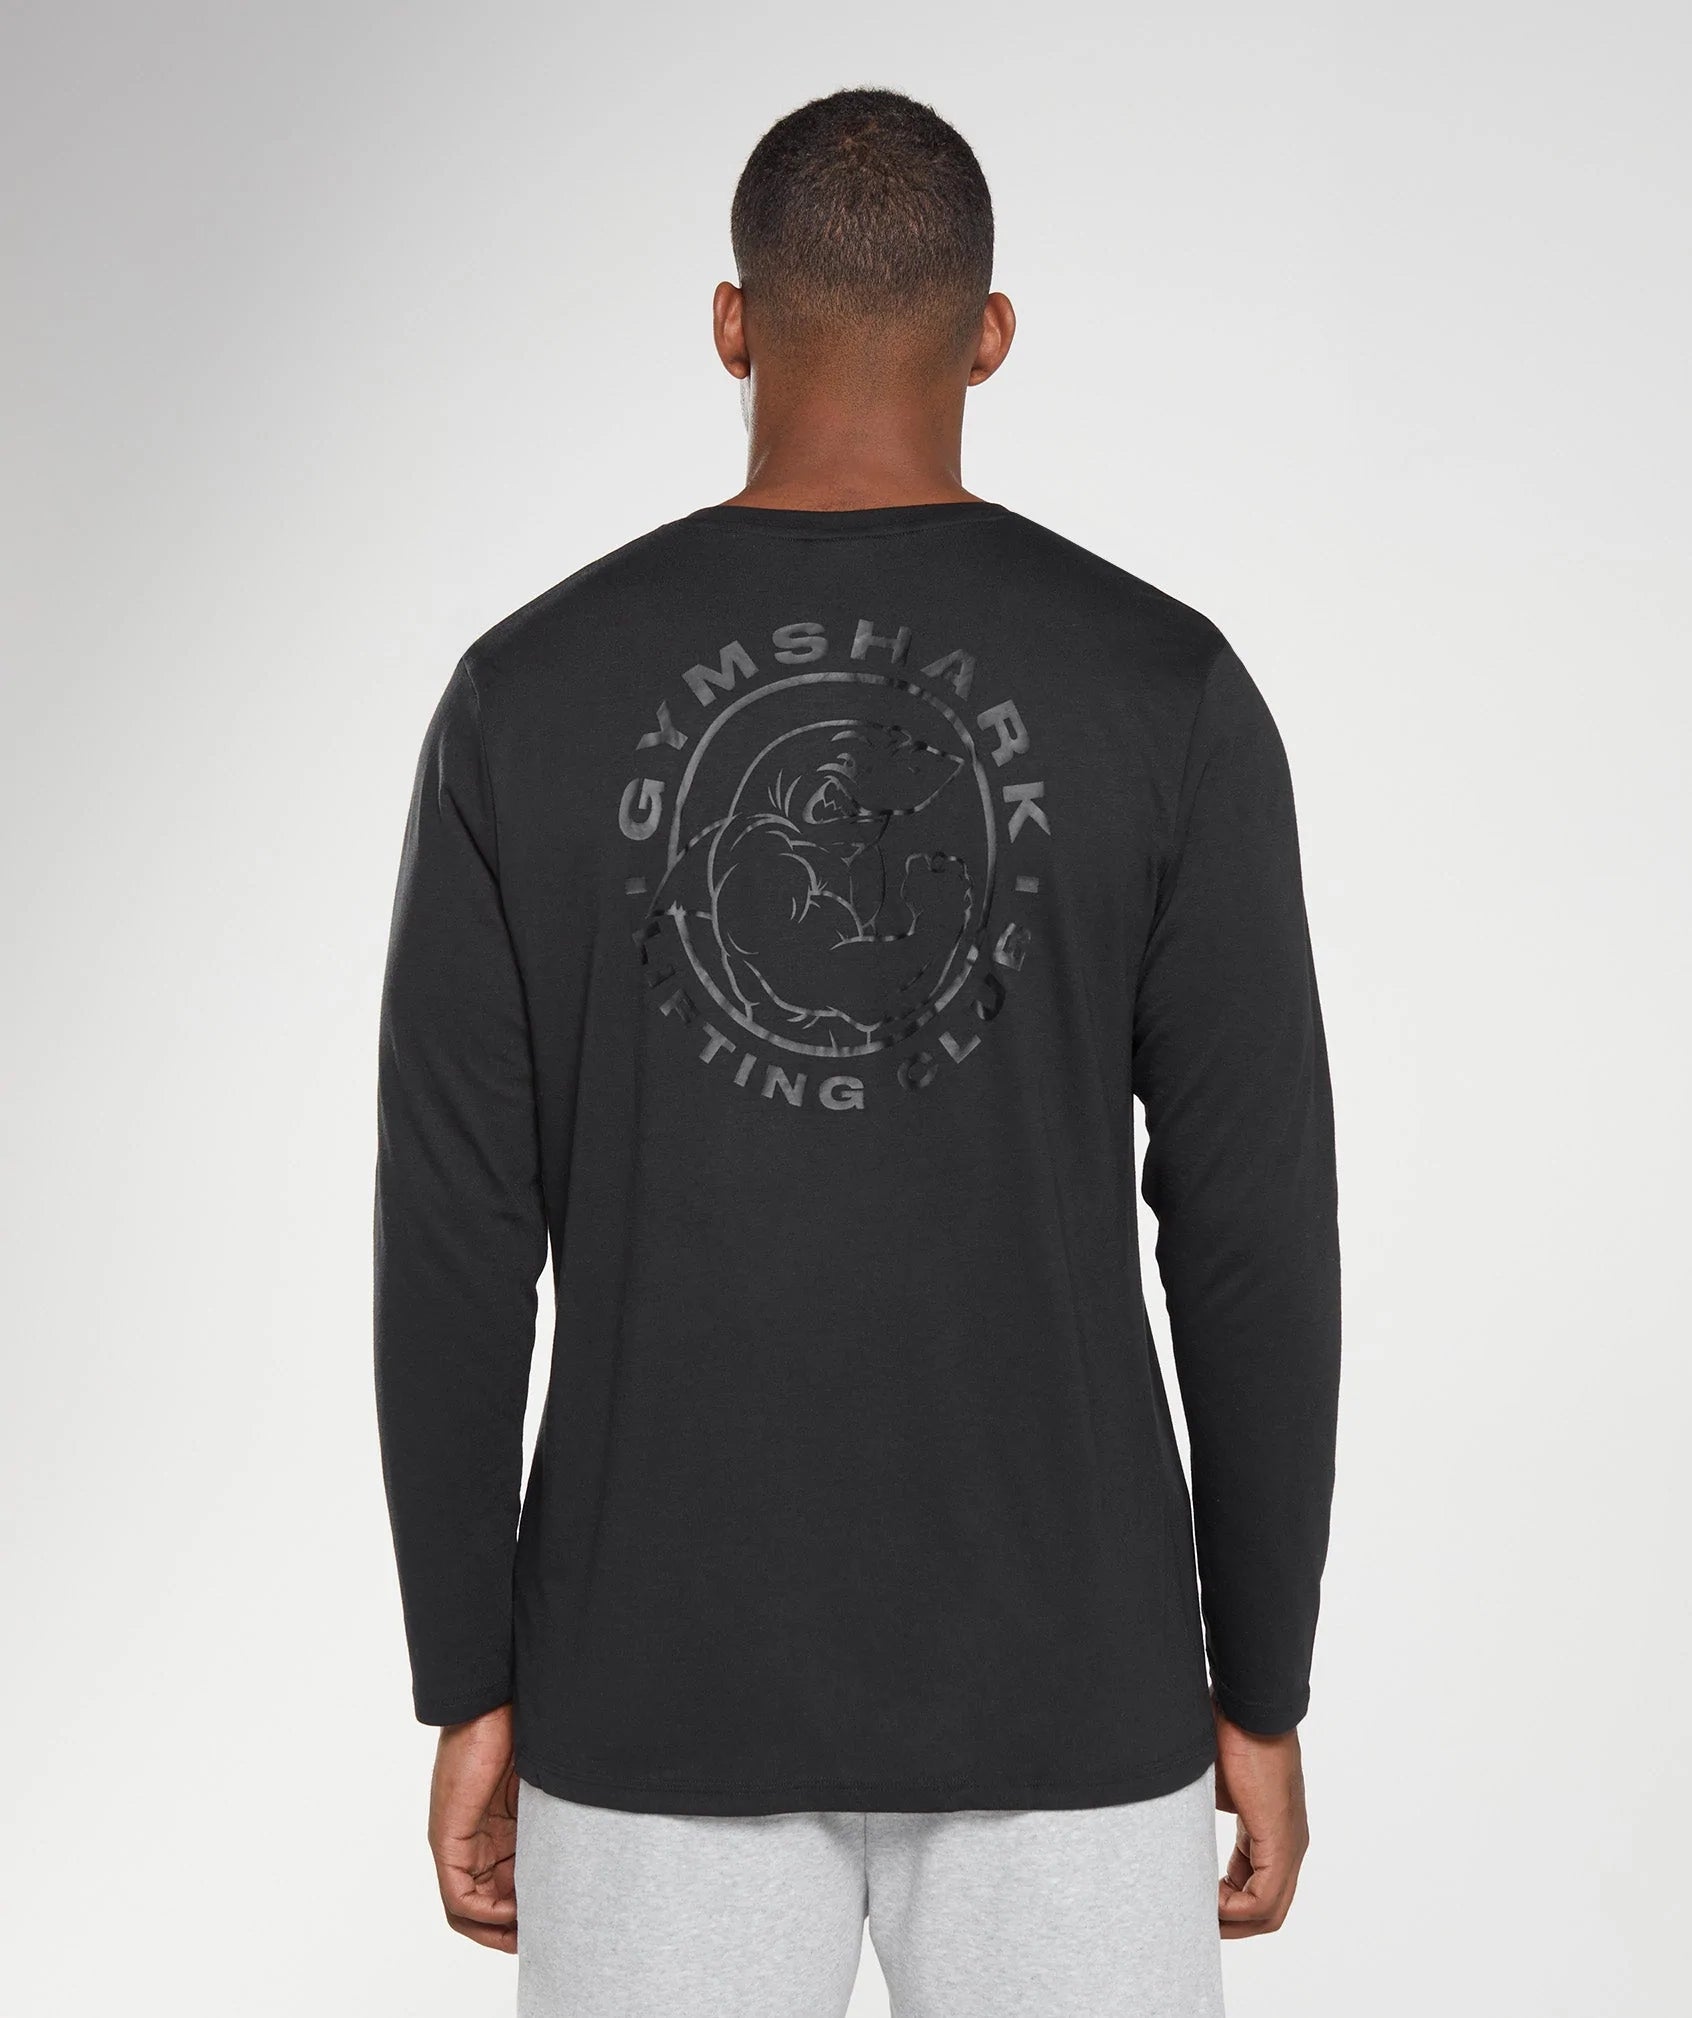 Legacy Long Sleeve T-Shirt in Black - view 2